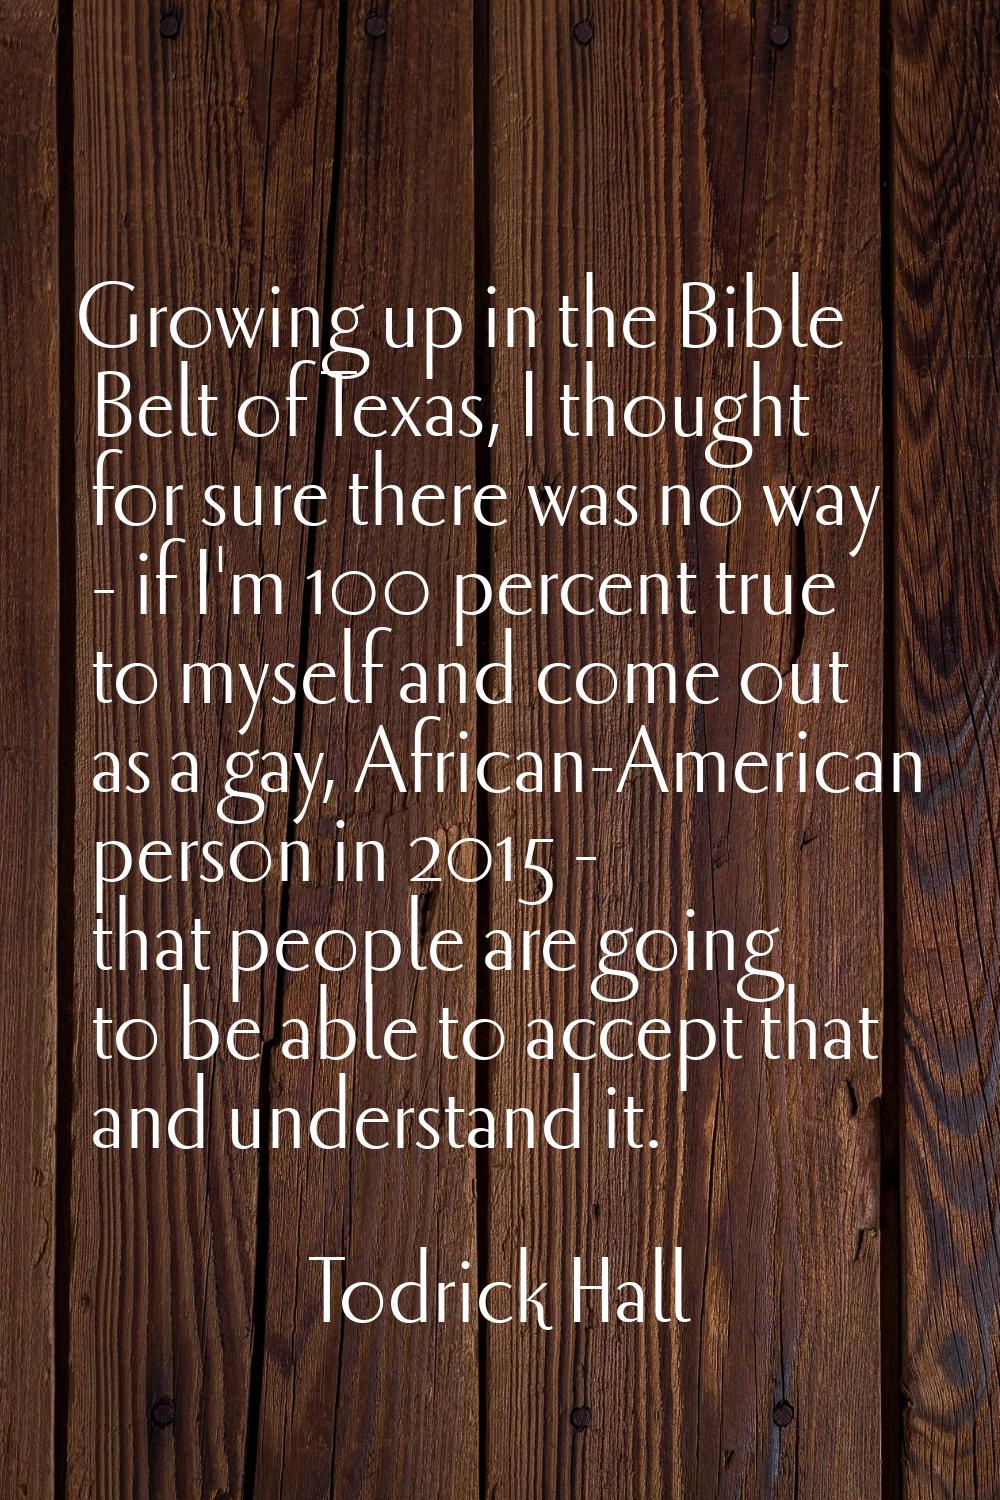 Growing up in the Bible Belt of Texas, I thought for sure there was no way - if I'm 100 percent tru